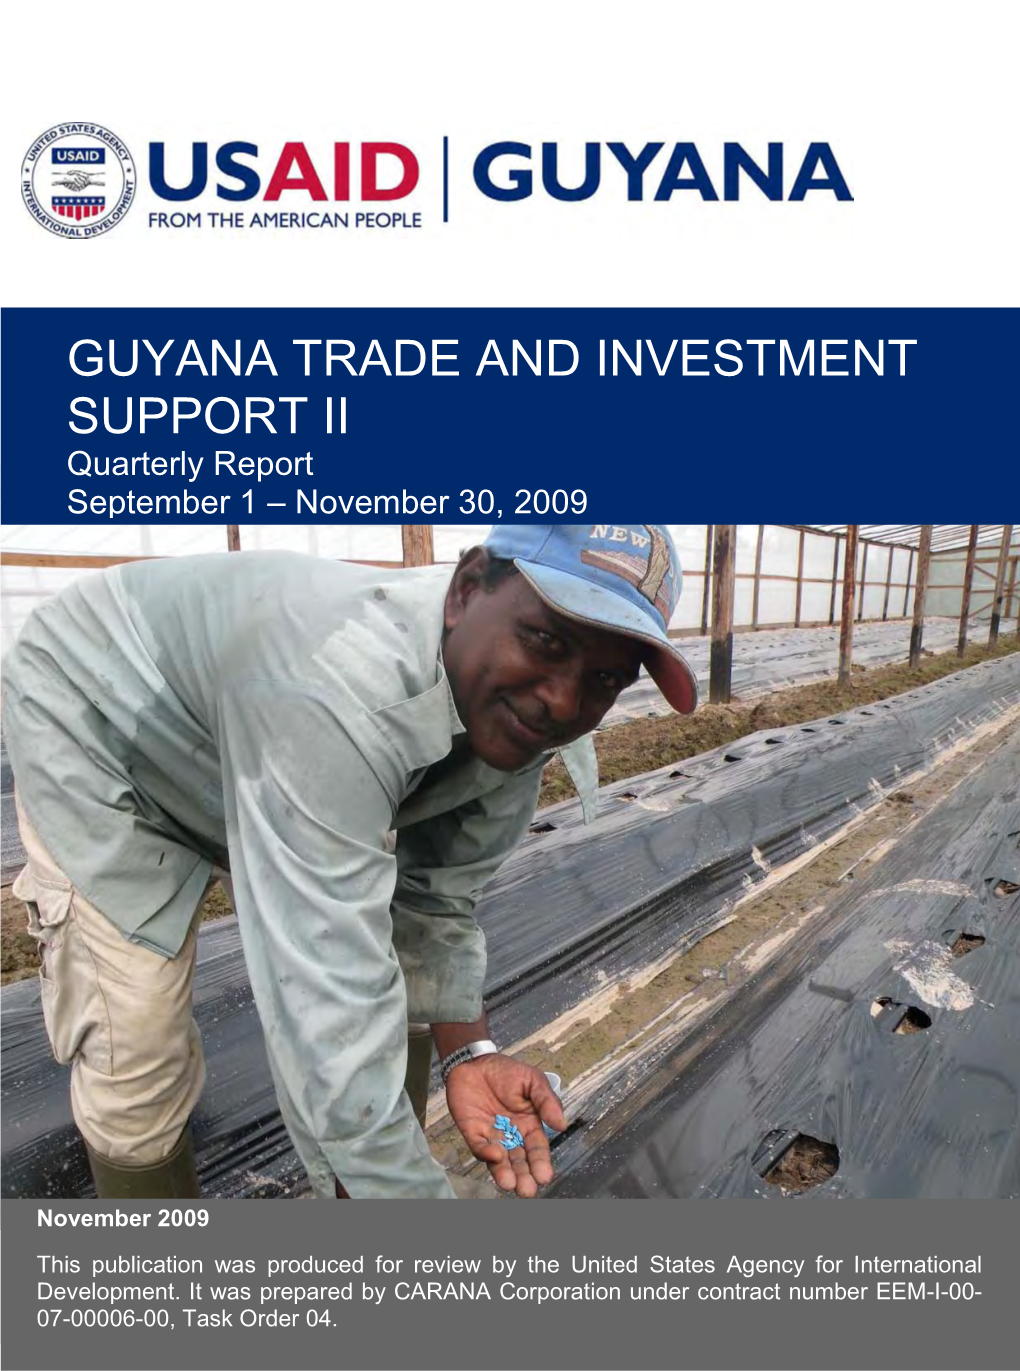 GUYANA TRADE and INVESTMENT SUPPORT II Quarterly Report September 1 – November Submitted30, 2009 By: CARANA CORPORATION